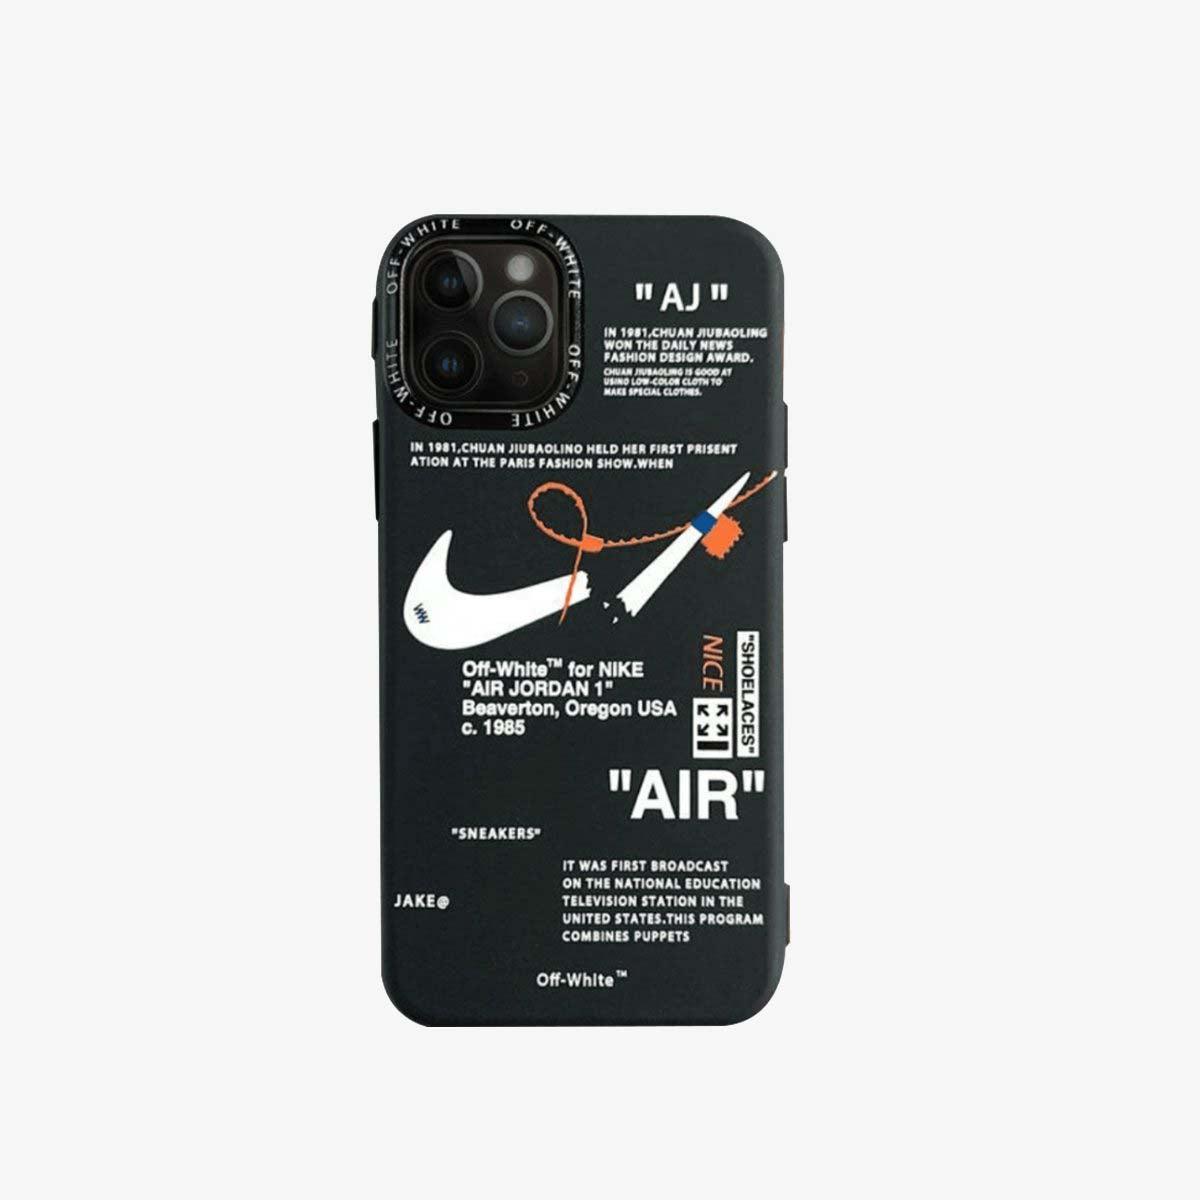 nike off white case iphone